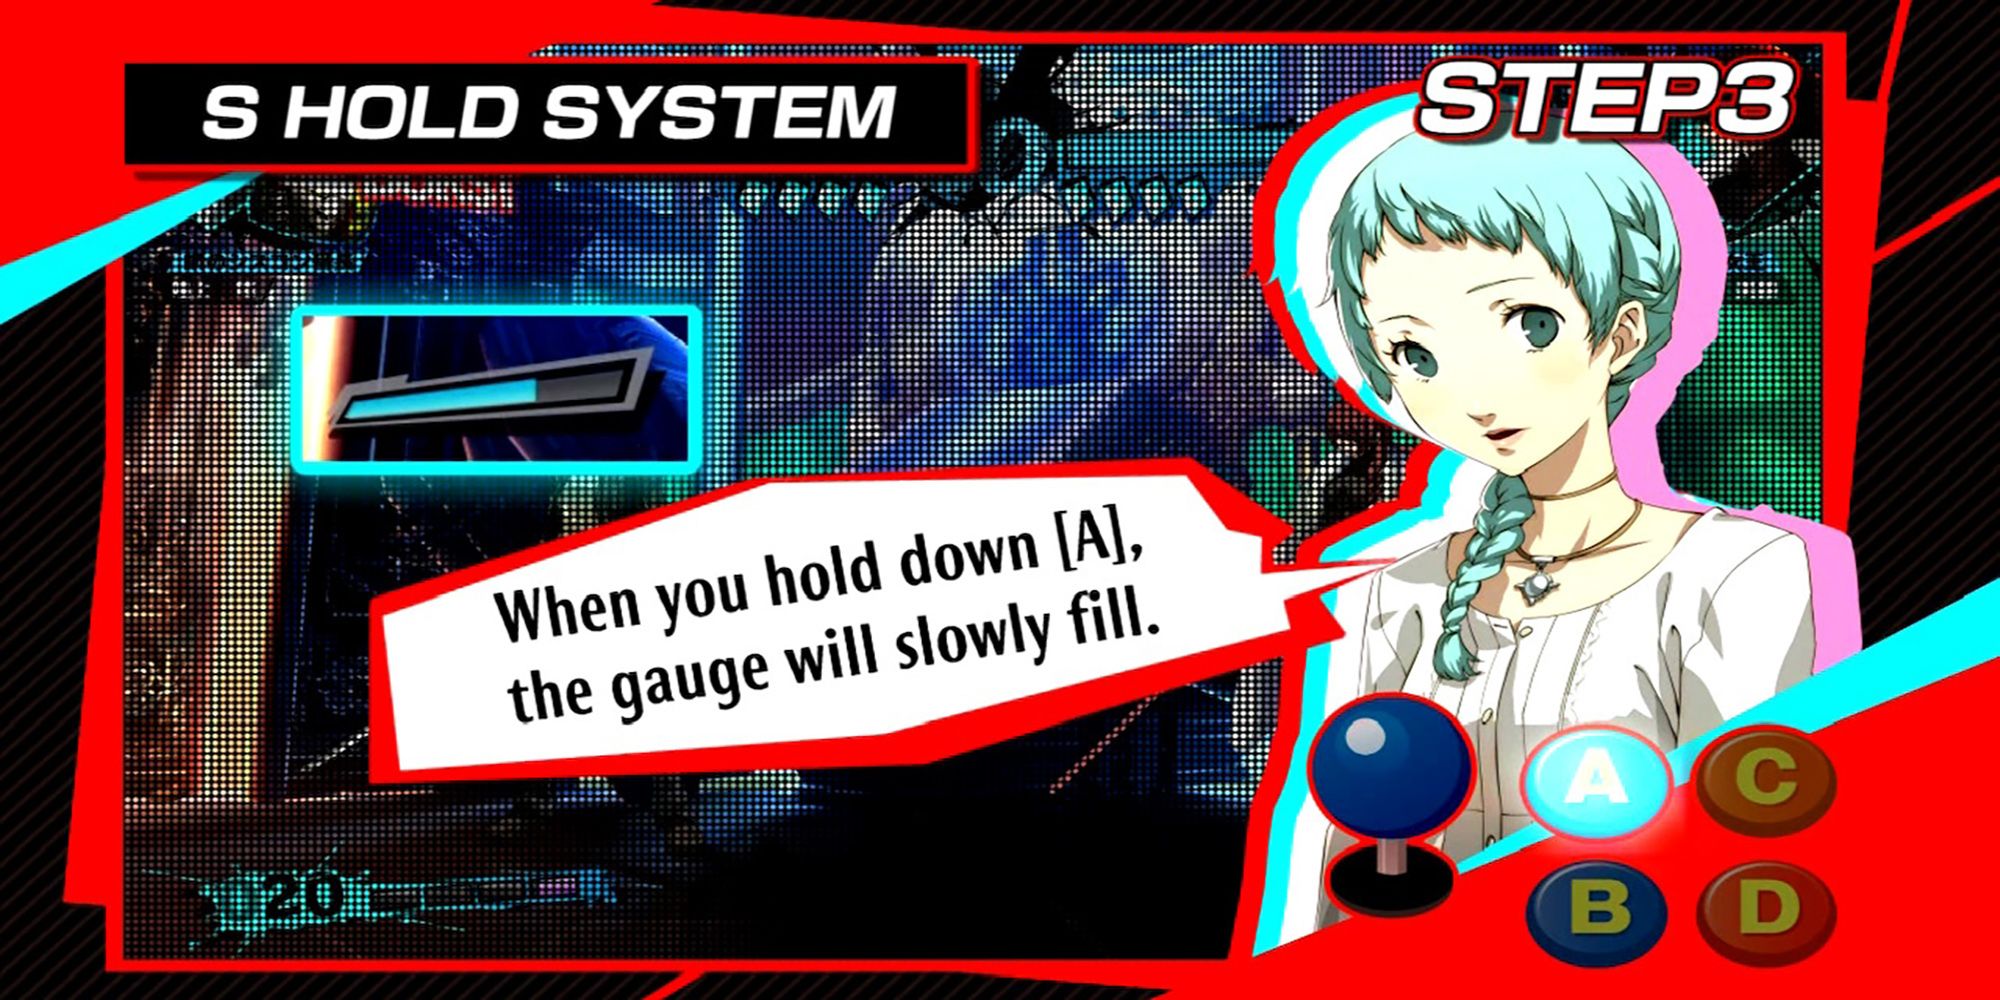 Fuuka Yamagishi explains how to use the S Hold System in a tutorial video for Persona 4 Arena Ultimax.